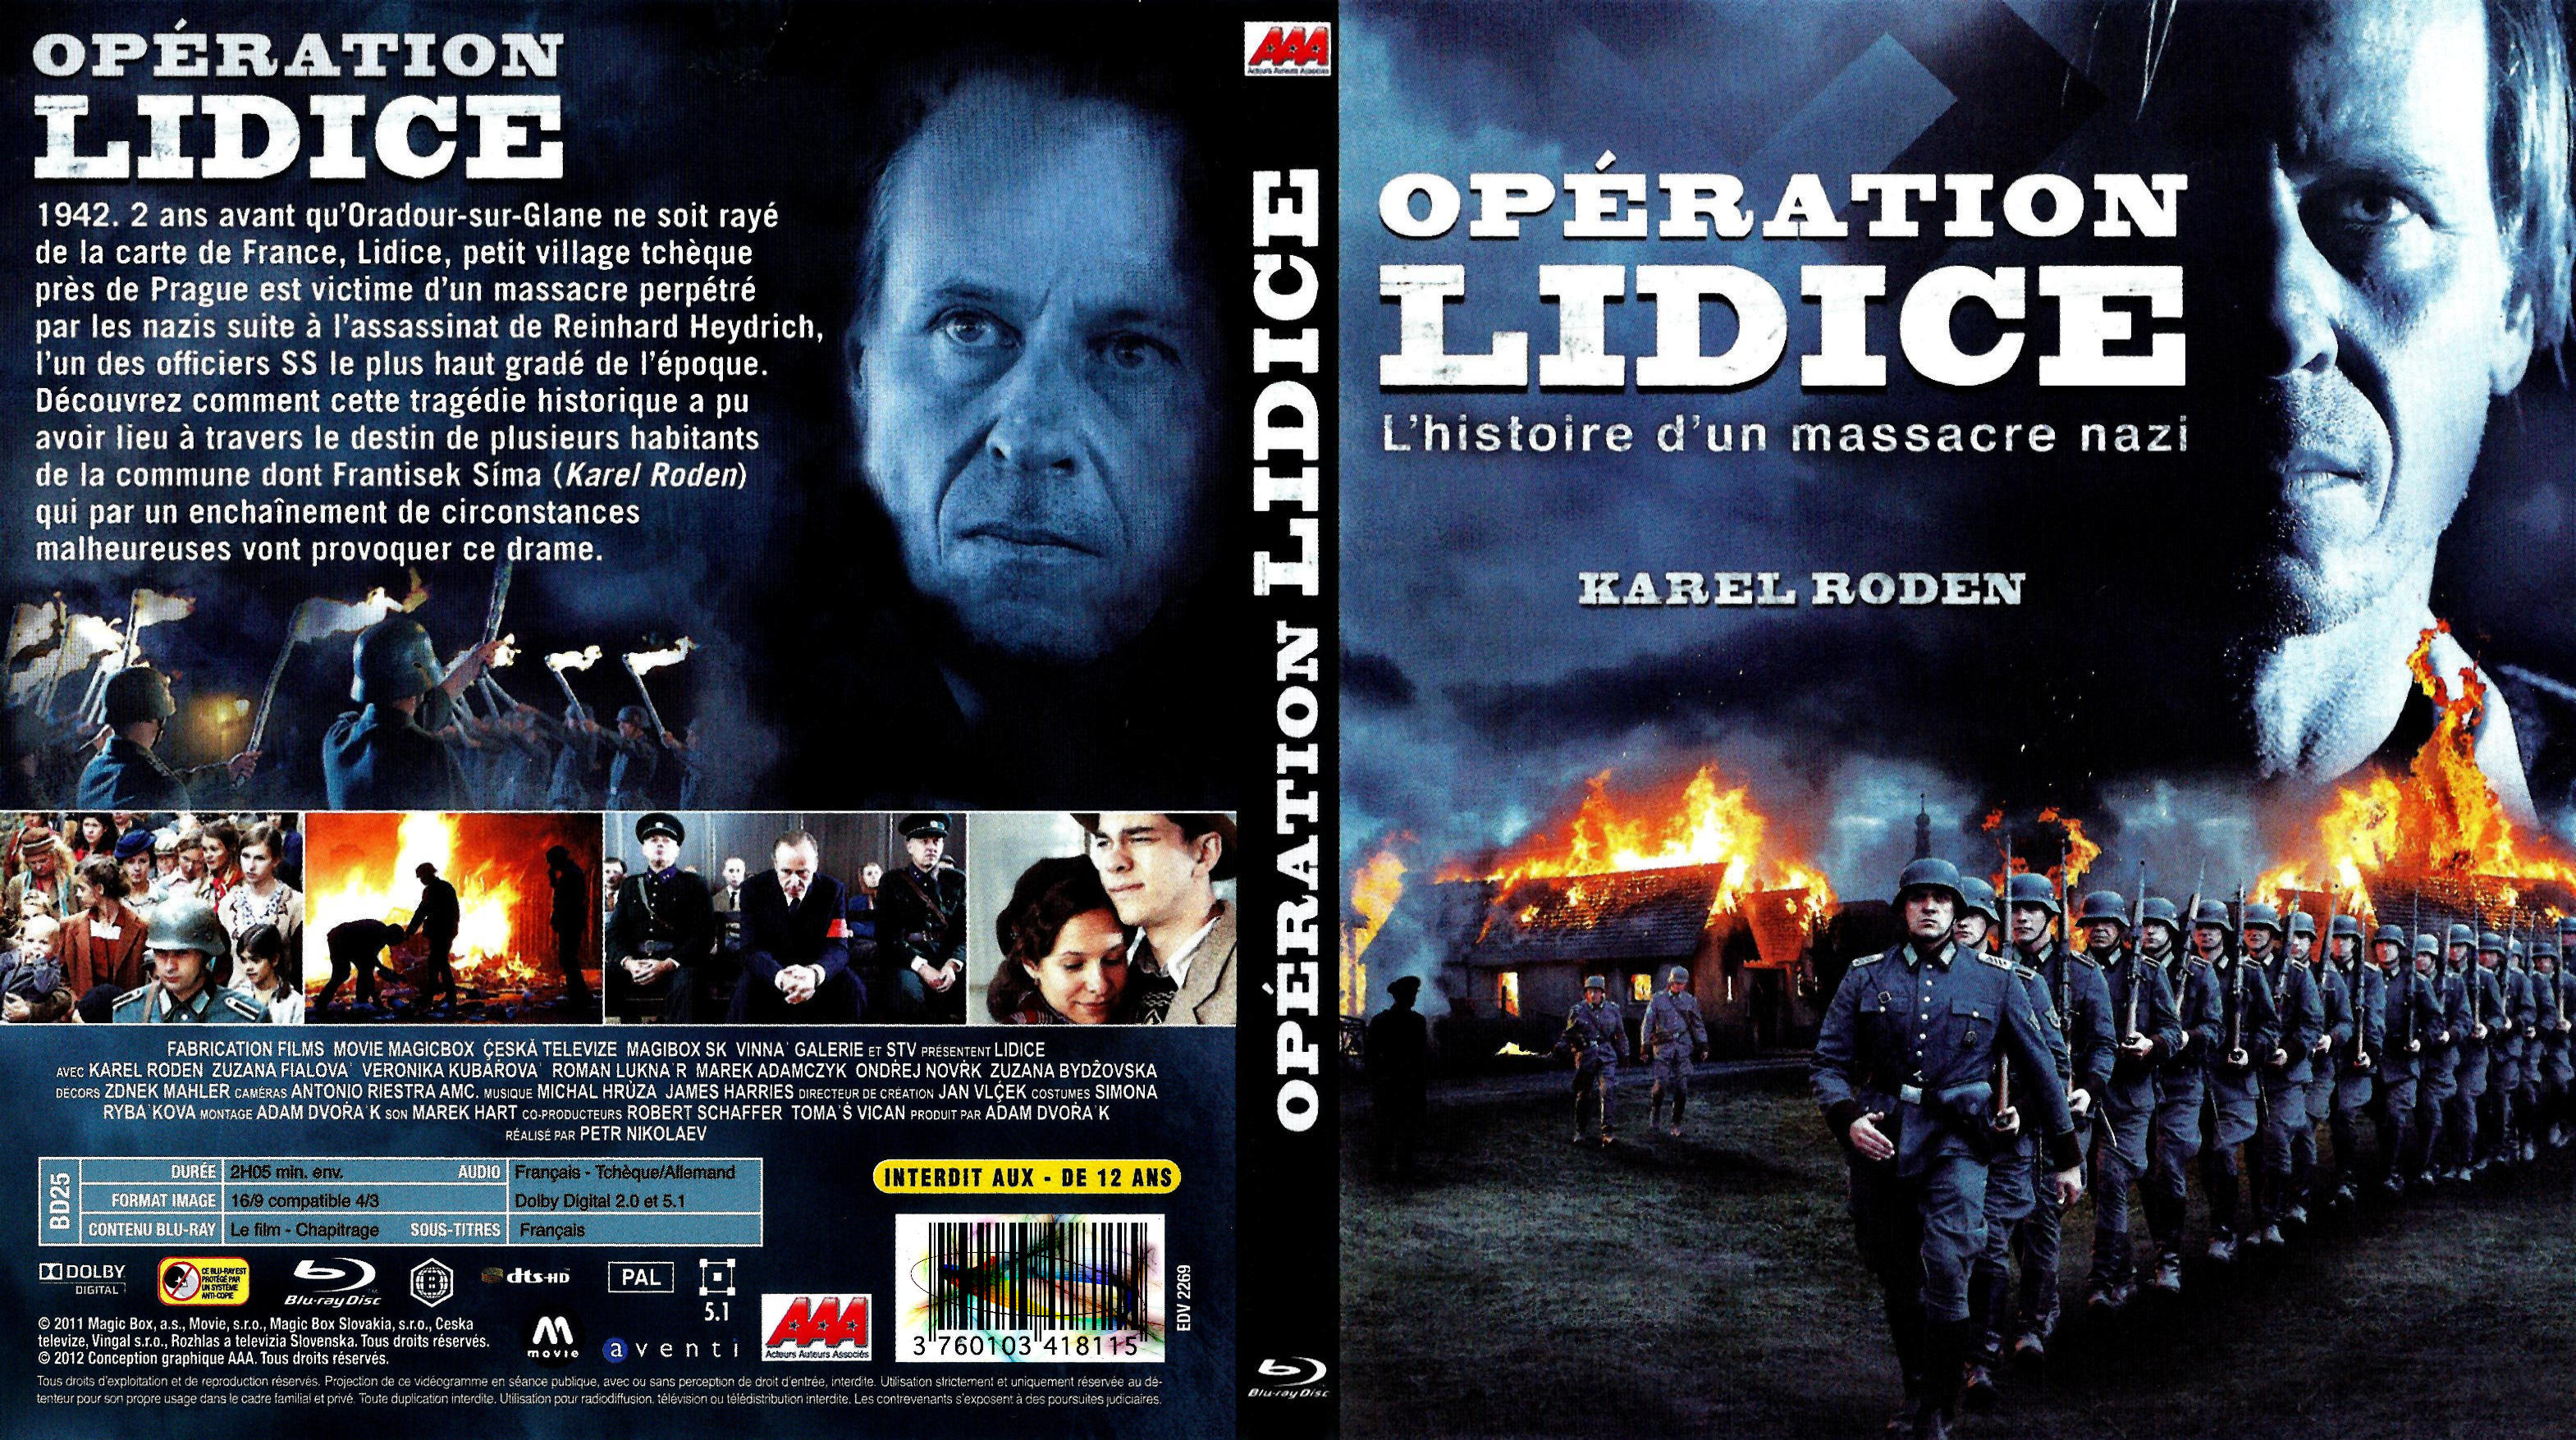 Jaquette DVD Operation lidice (BLU-RAY)